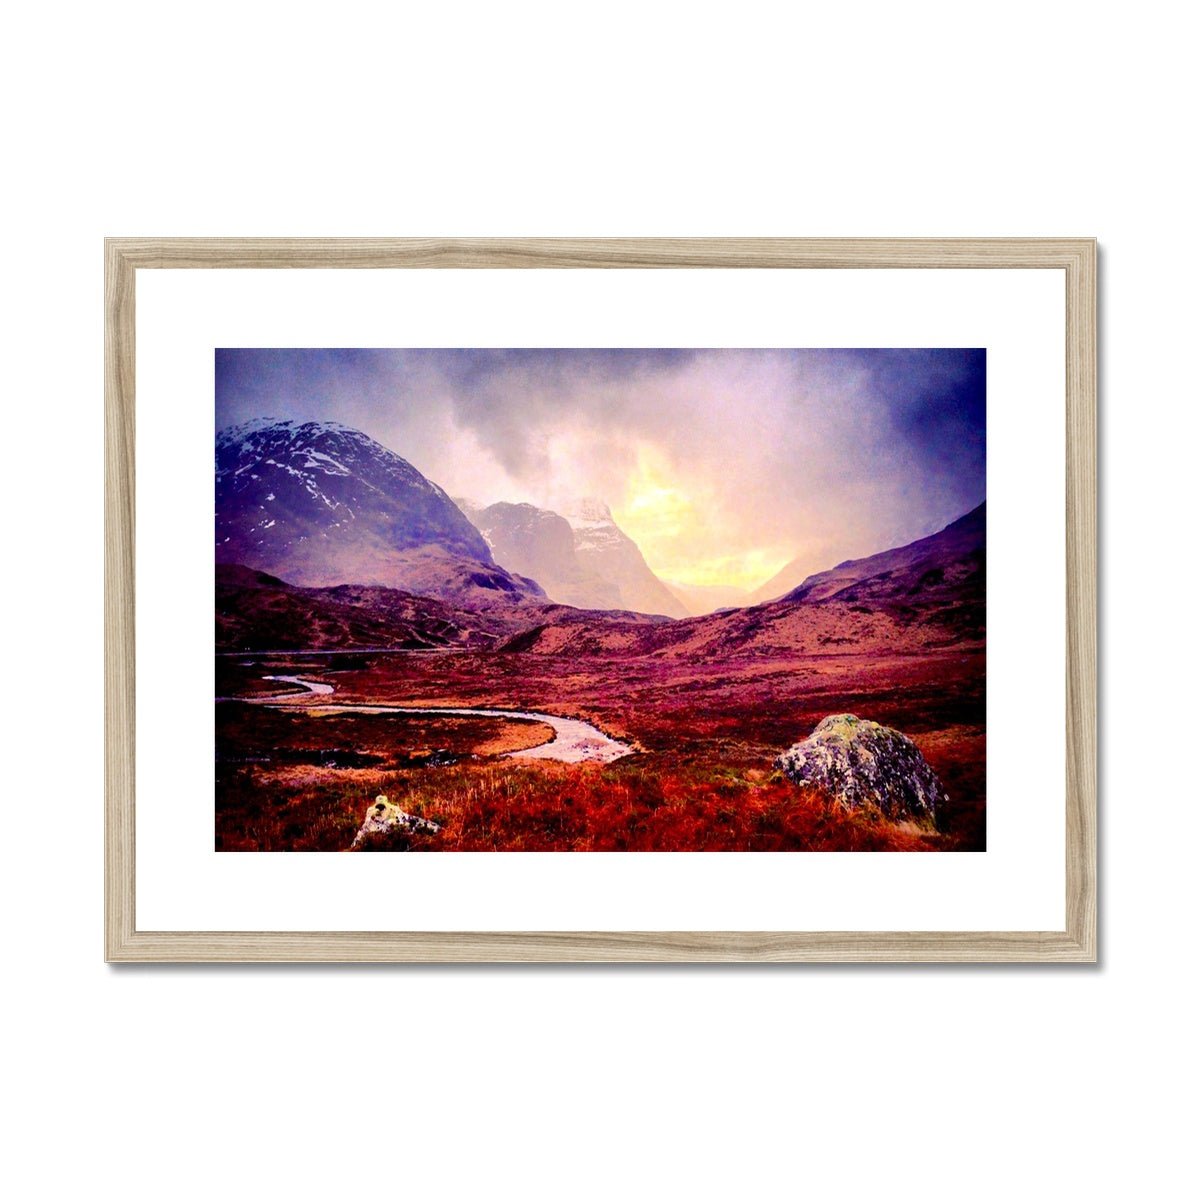 A Brooding Glencoe Painting | Framed & Mounted Prints From Scotland-Framed & Mounted Prints-Glencoe Art Gallery-A2 Landscape-Natural Frame-Paintings, Prints, Homeware, Art Gifts From Scotland By Scottish Artist Kevin Hunter